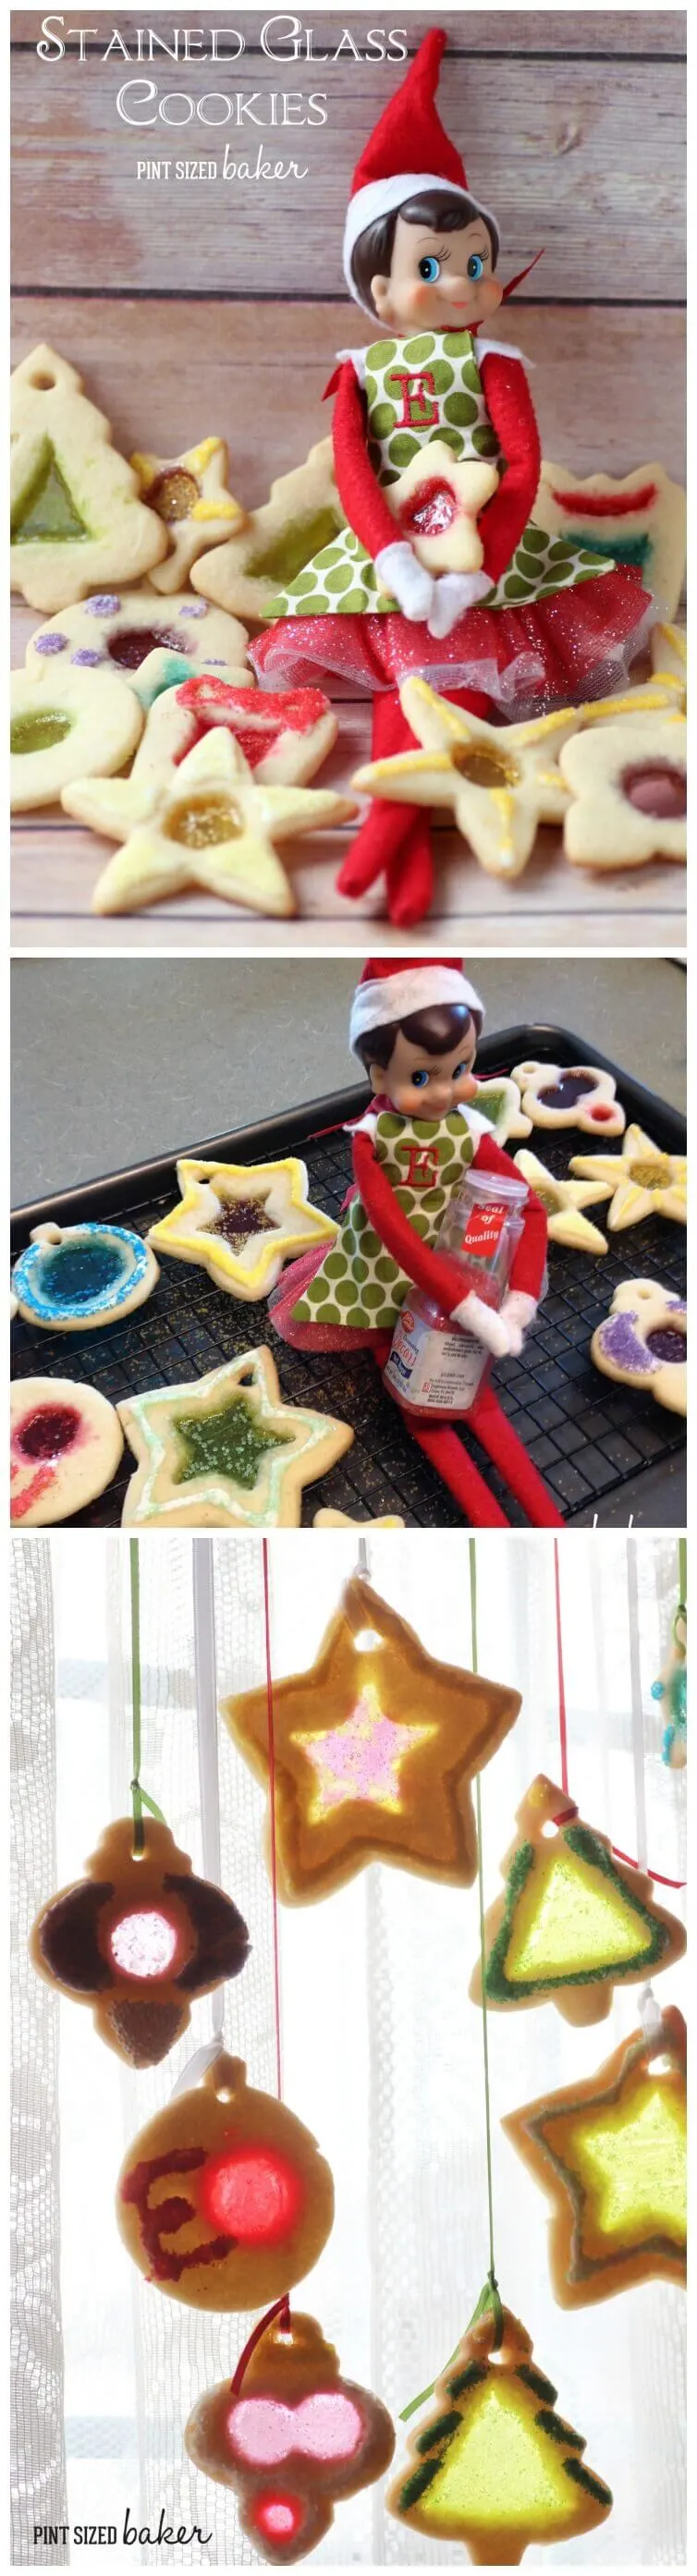 Stunning Stained Glass Christmas Cookies baked with our family Elf on the Shelf! Bake the cookies and hang them in window to show off all the colors.